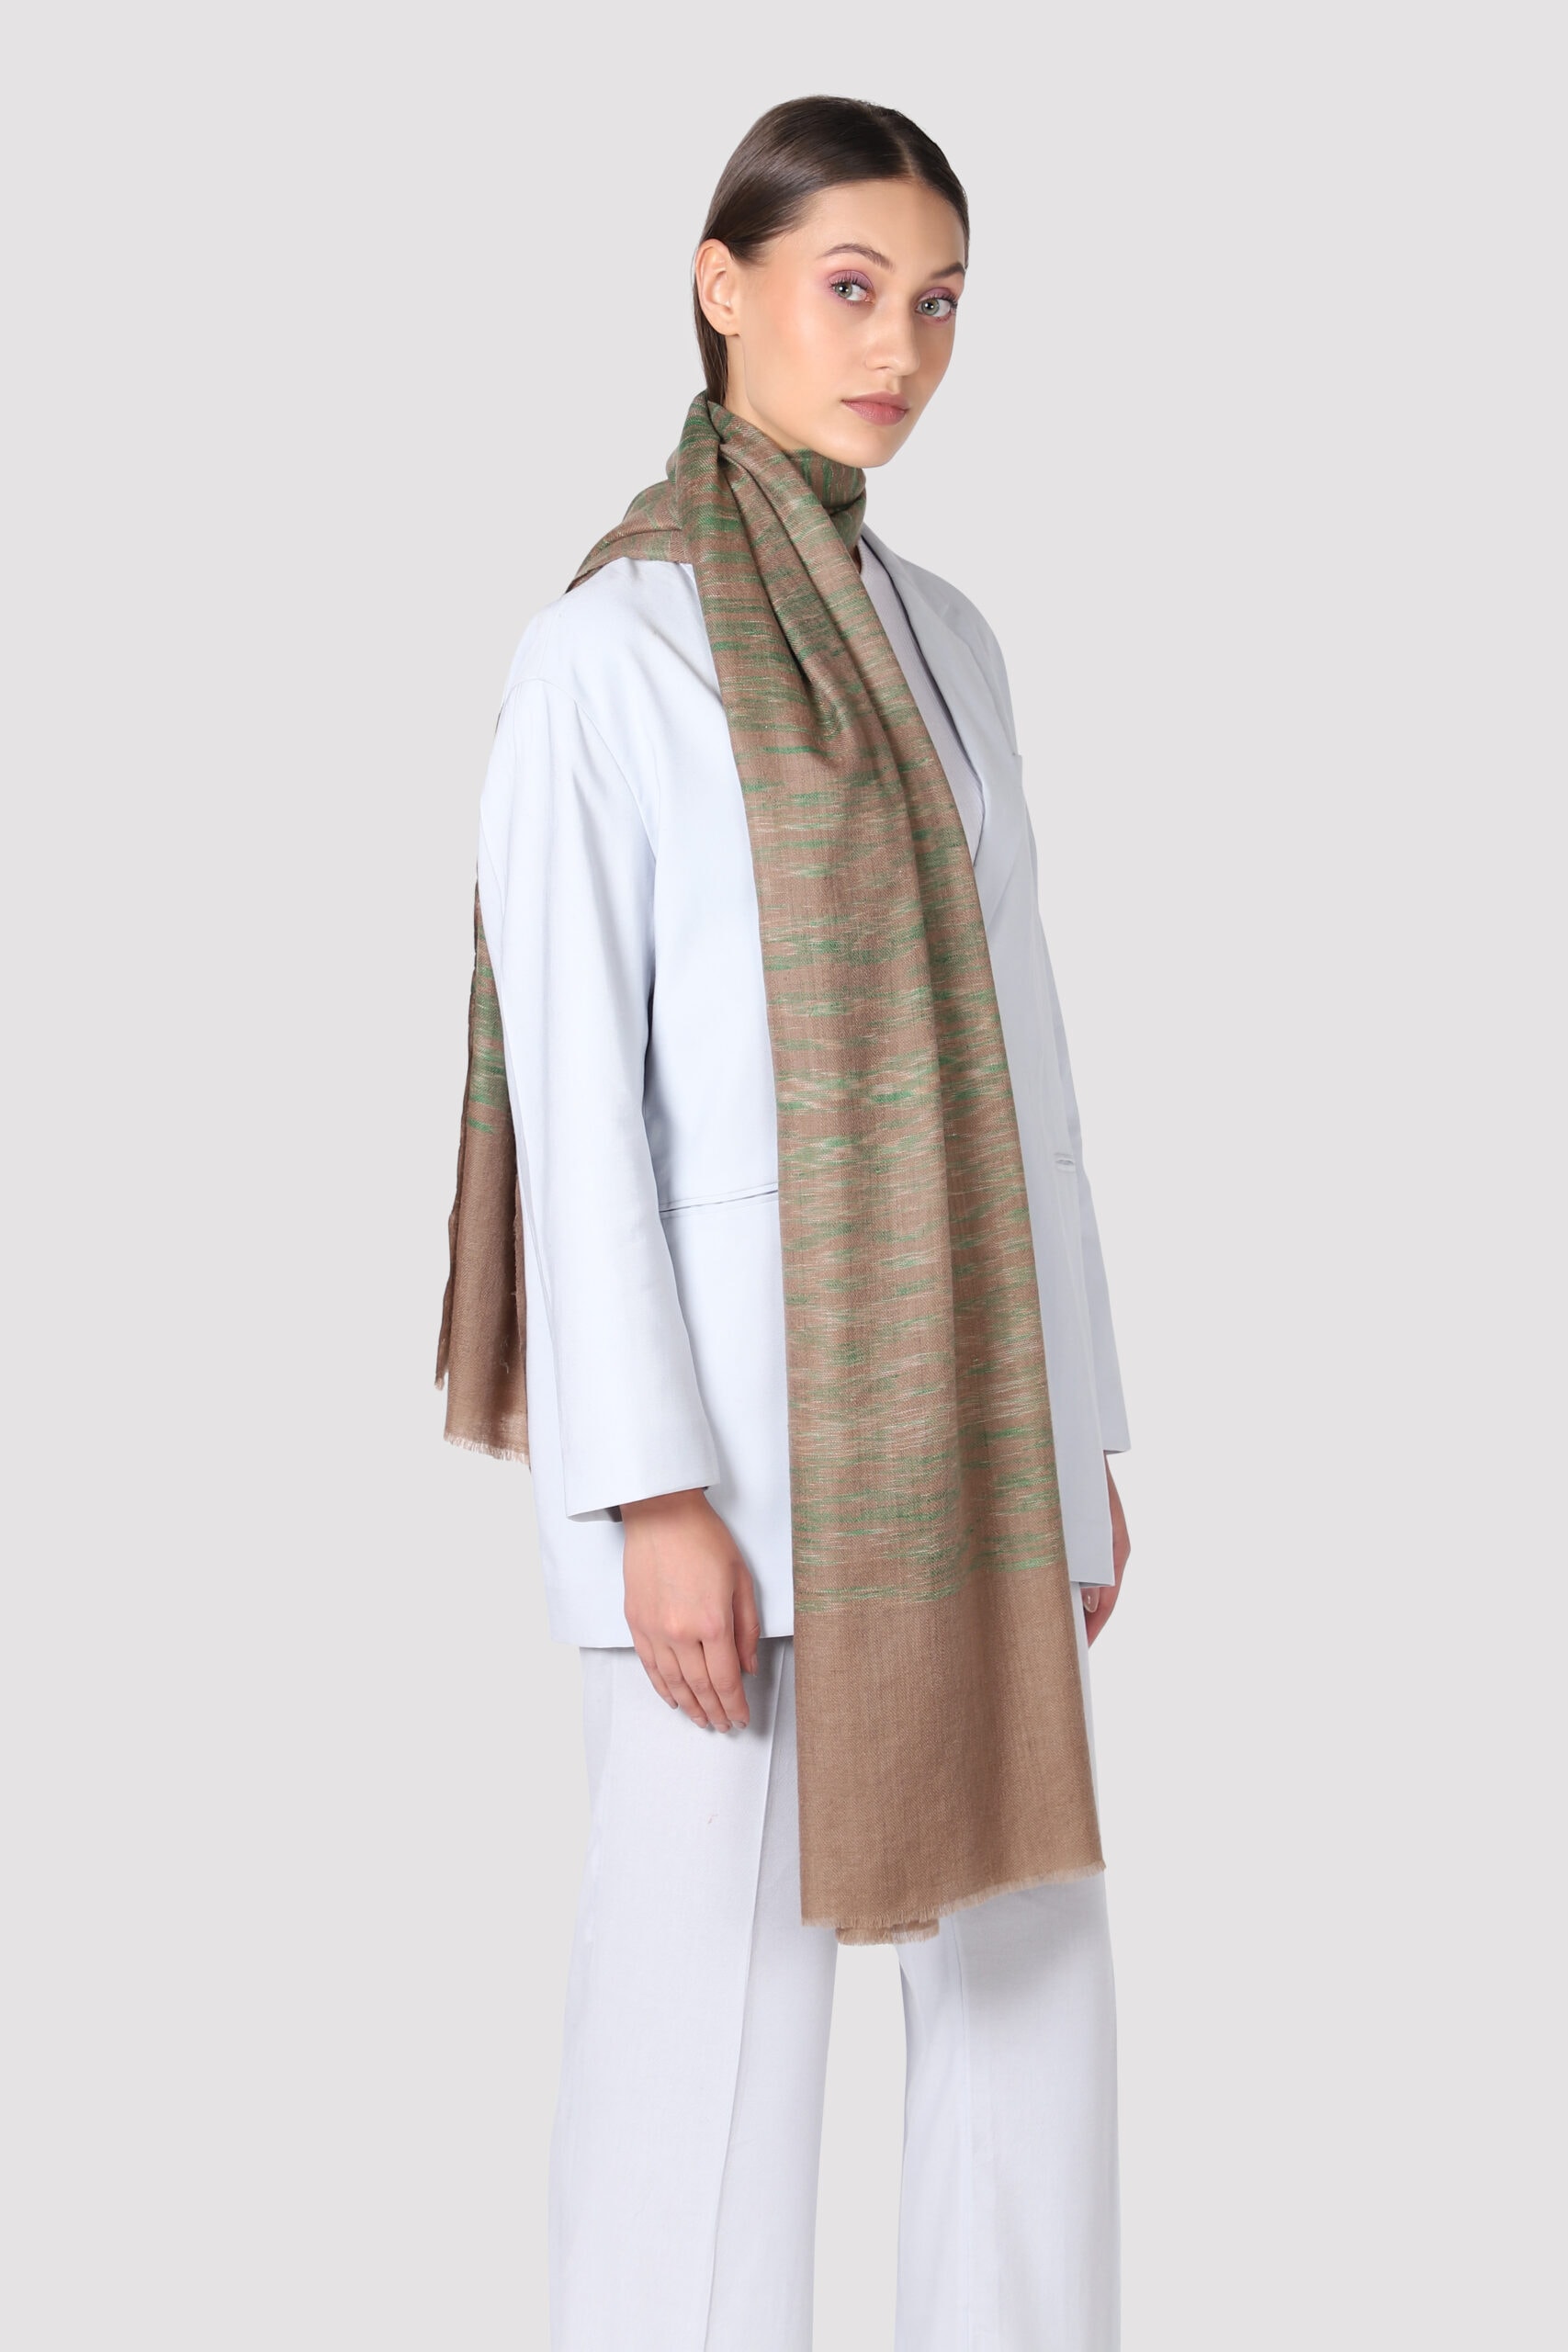 Woman in side pose wearing natural brown and green shaded Ikat shawl - MeandK